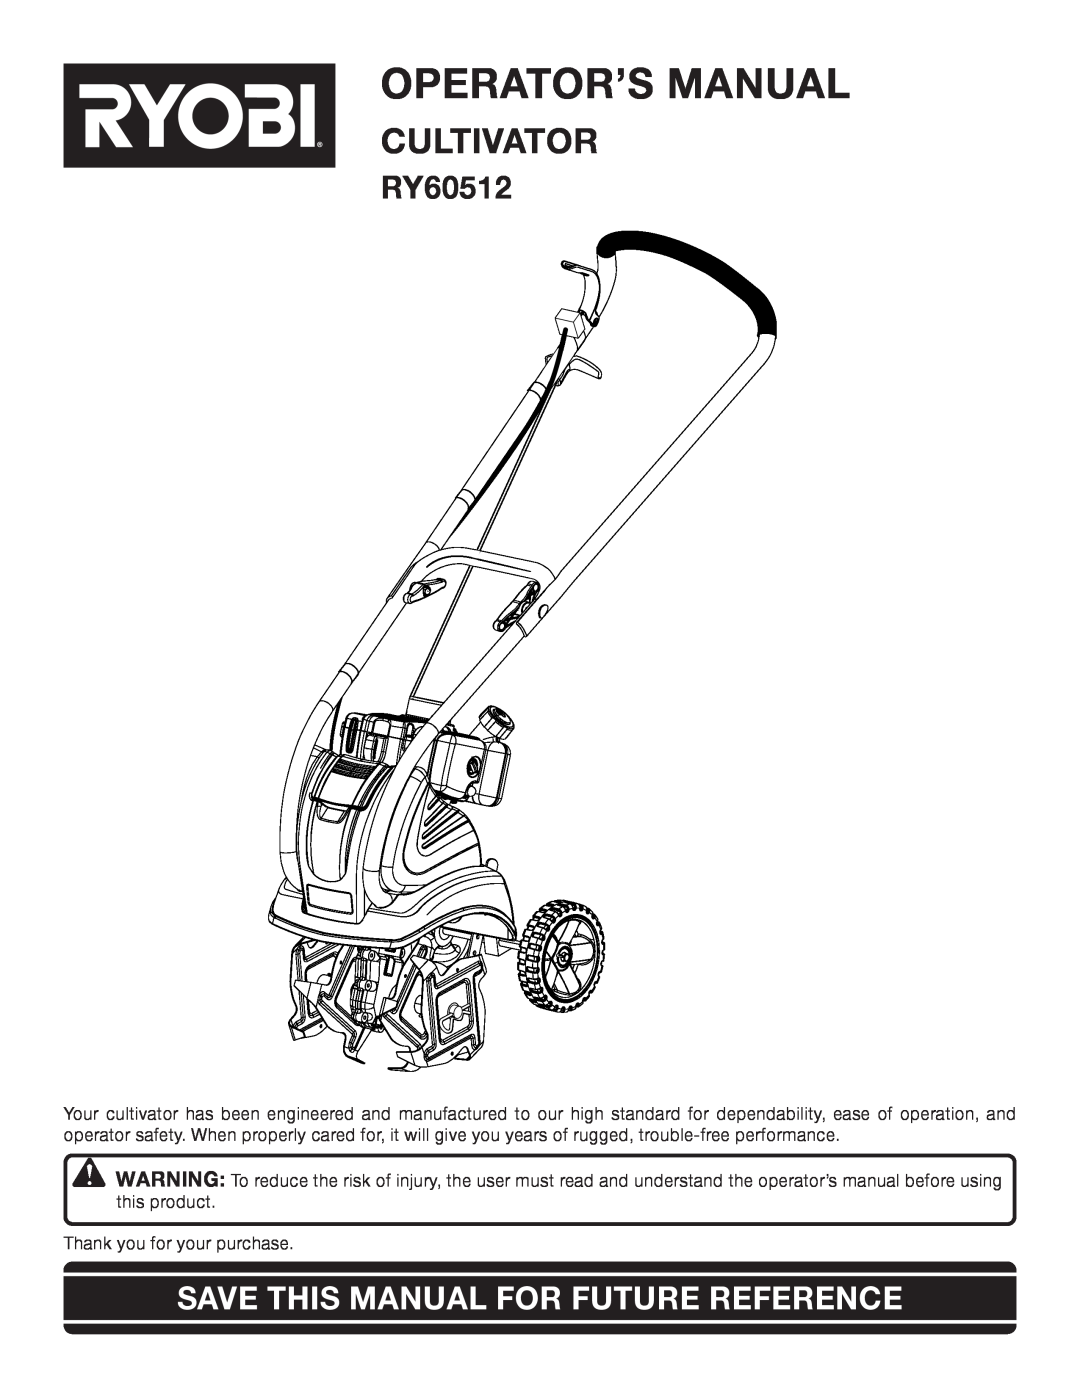 Ryobi RY60512 manual Operator’S Manual, Cultivator, Save This Manual For Future Reference 